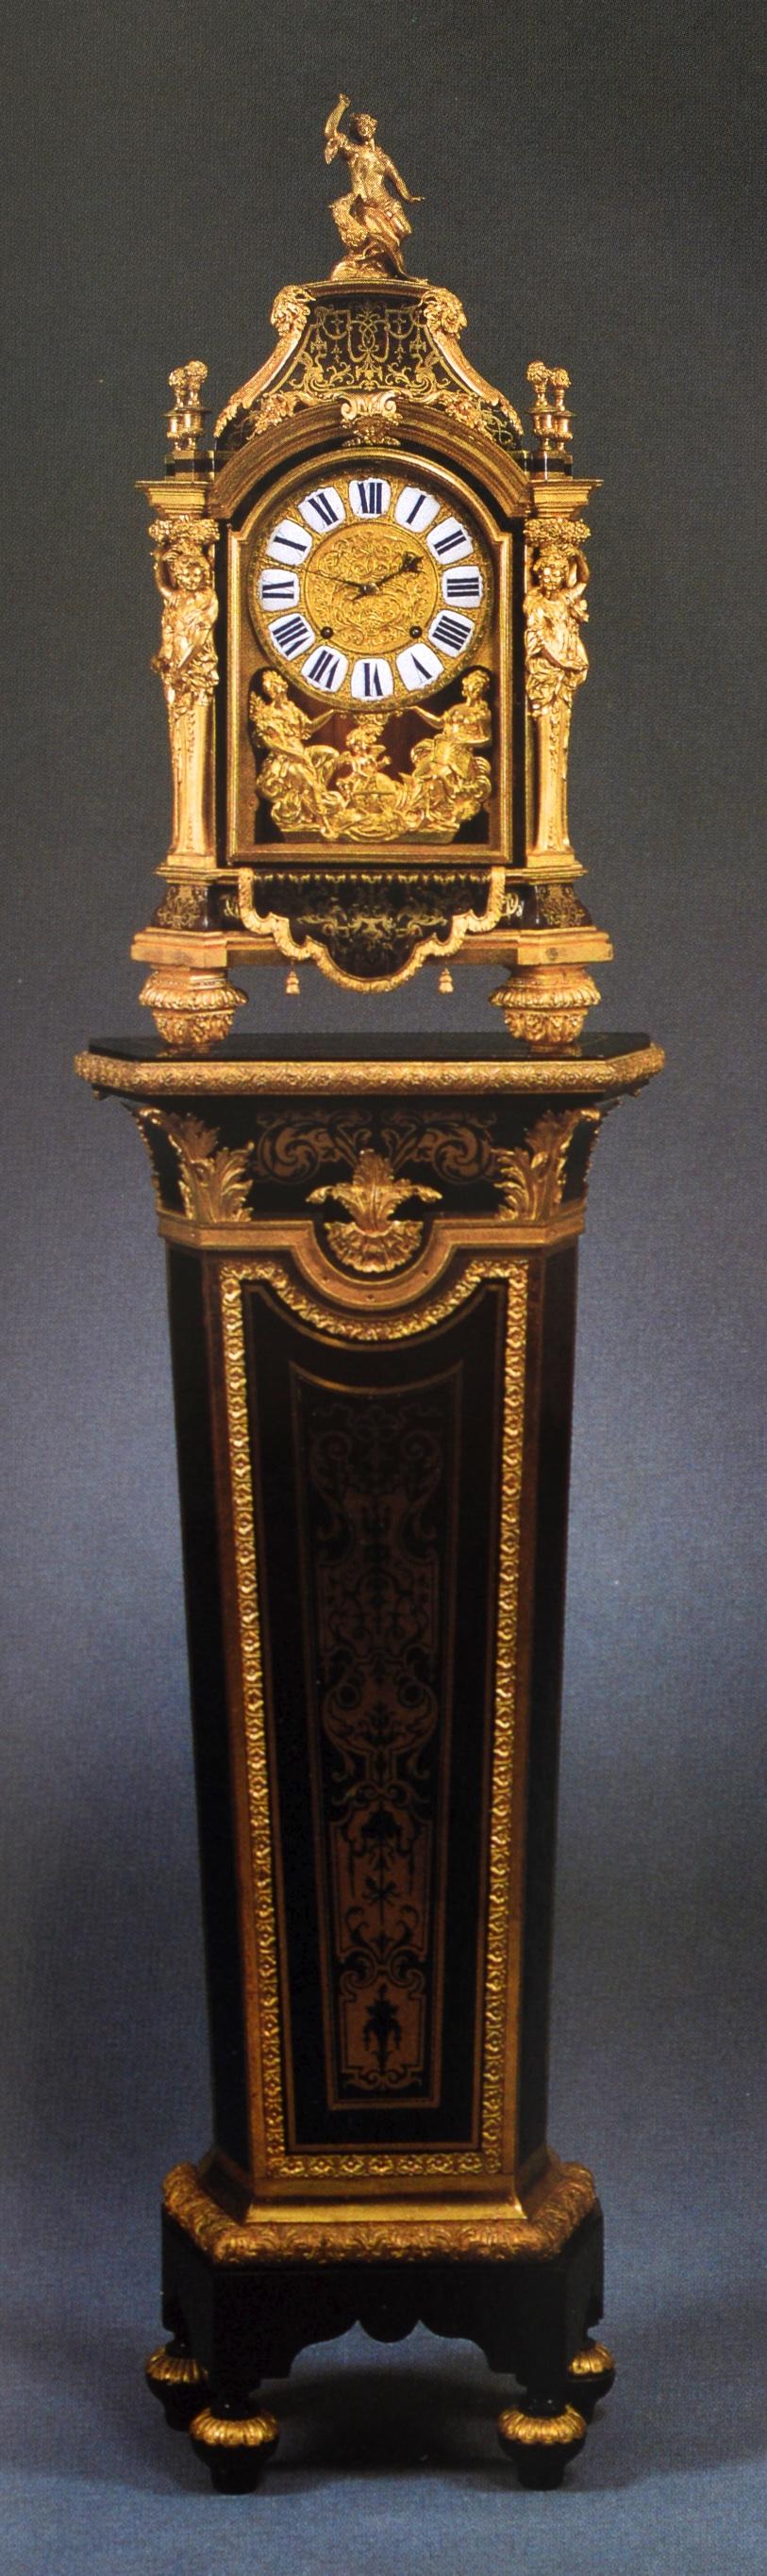 American Sotheby's, Highly Important French Furniture from a Private Collection, 1993 For Sale